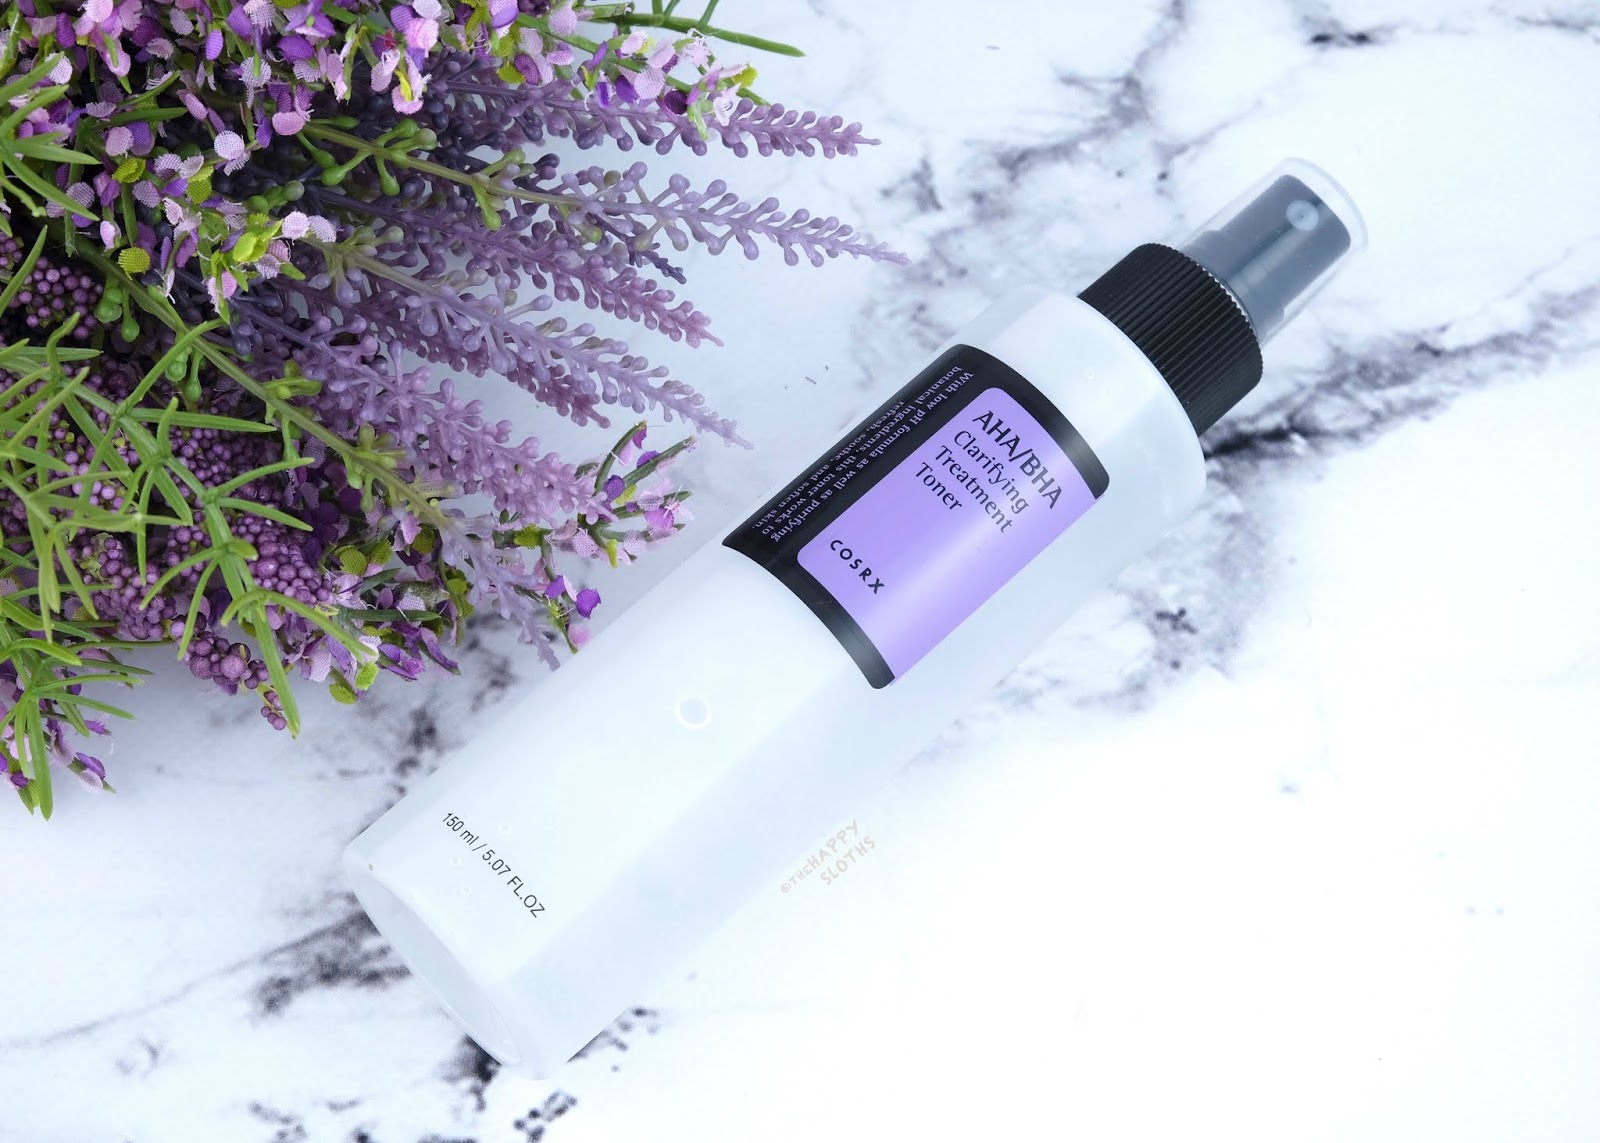 COSRX | AHA/BHA Clarifying Treatment Toner: Review | The Happy Sloths: Beauty, Makeup, and Skincare Blog with Reviews and